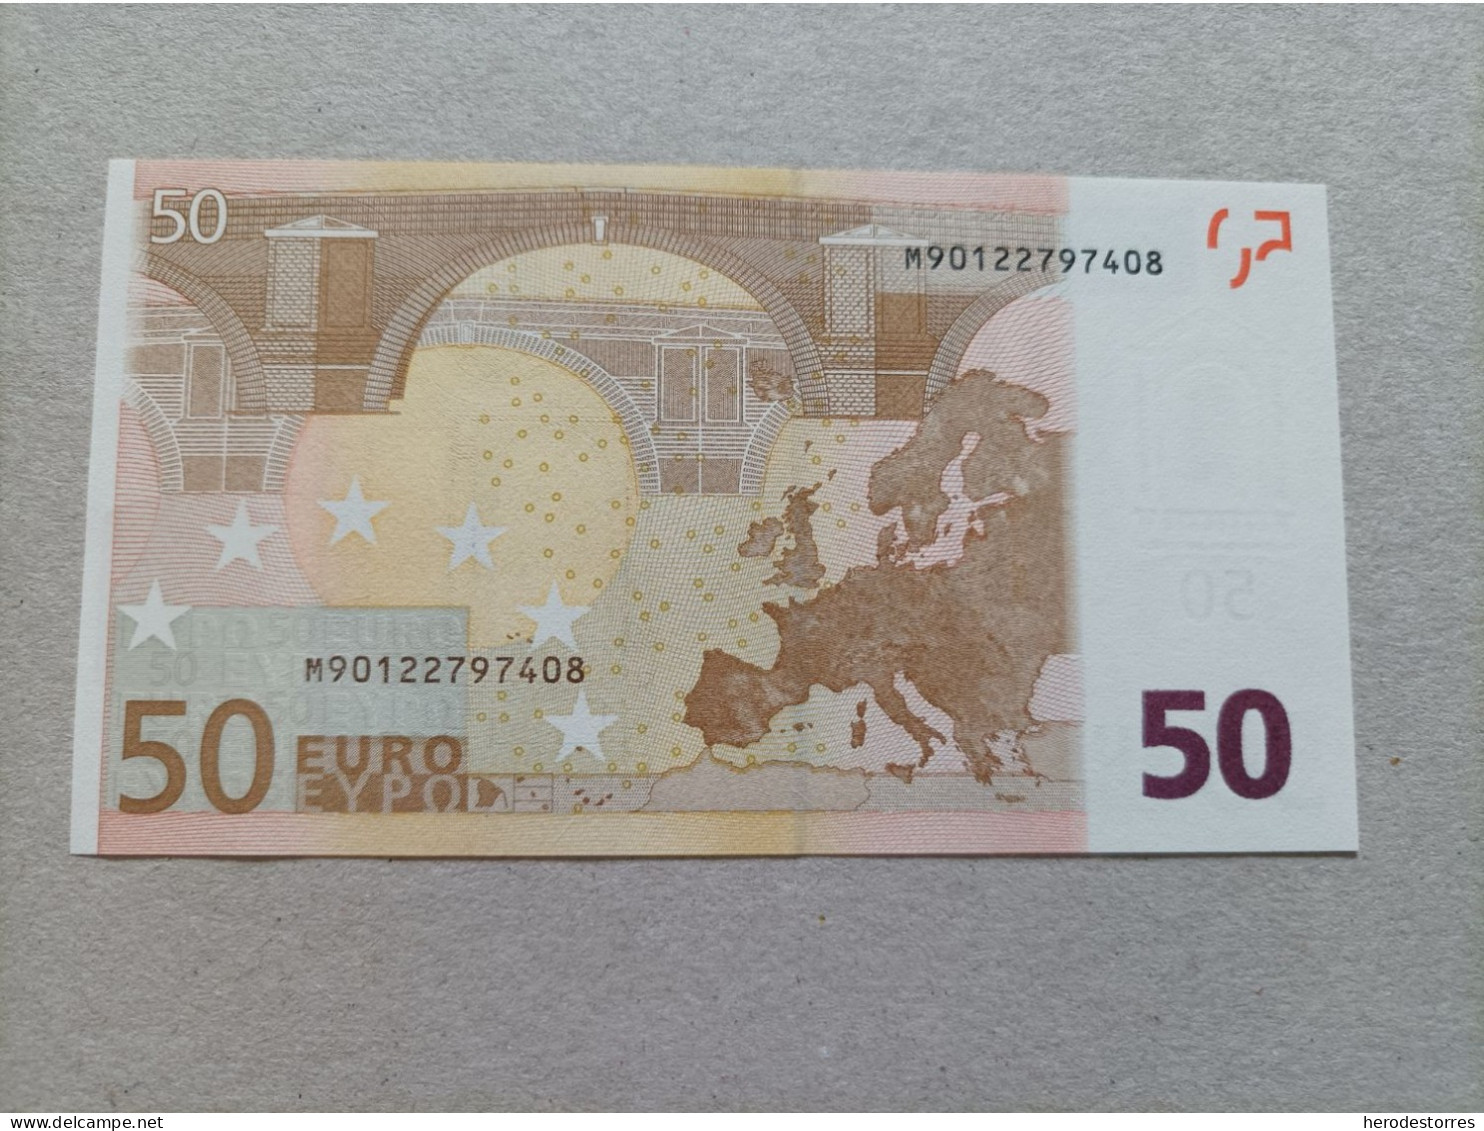 50 EURO PORTUGAL (M) H007A1 First Position, DUISEMBERG, Sehr Scarce, UNC - 50 Euro